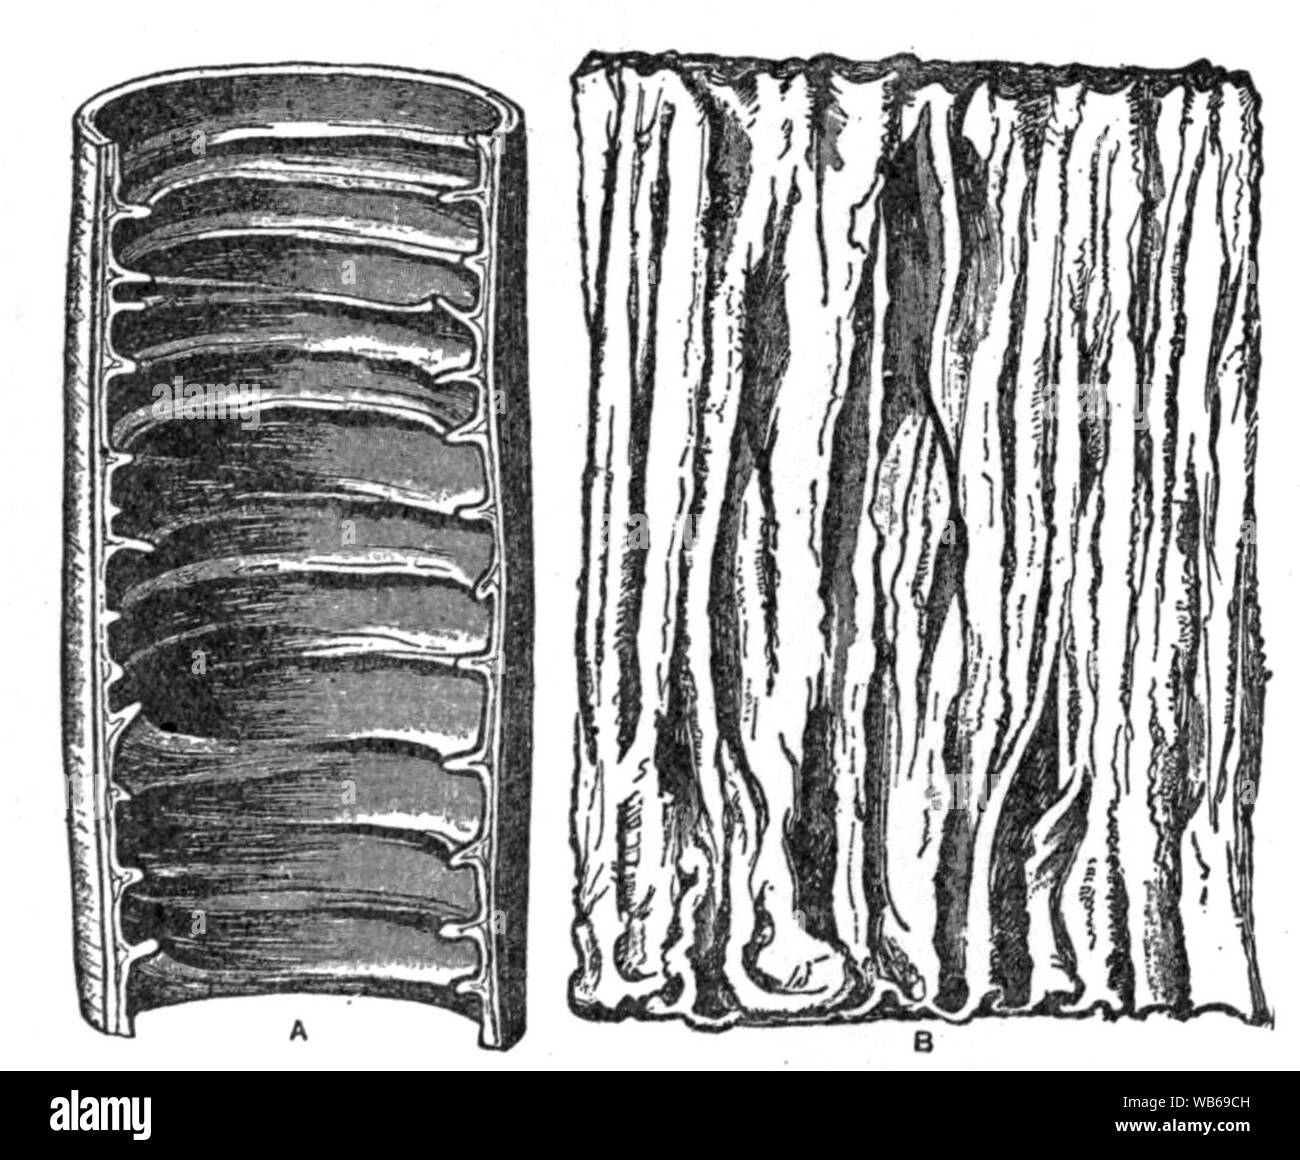 EB1911 Alimentary Canal Fig. 3.—Valvulae Conniventes. Stock Photo